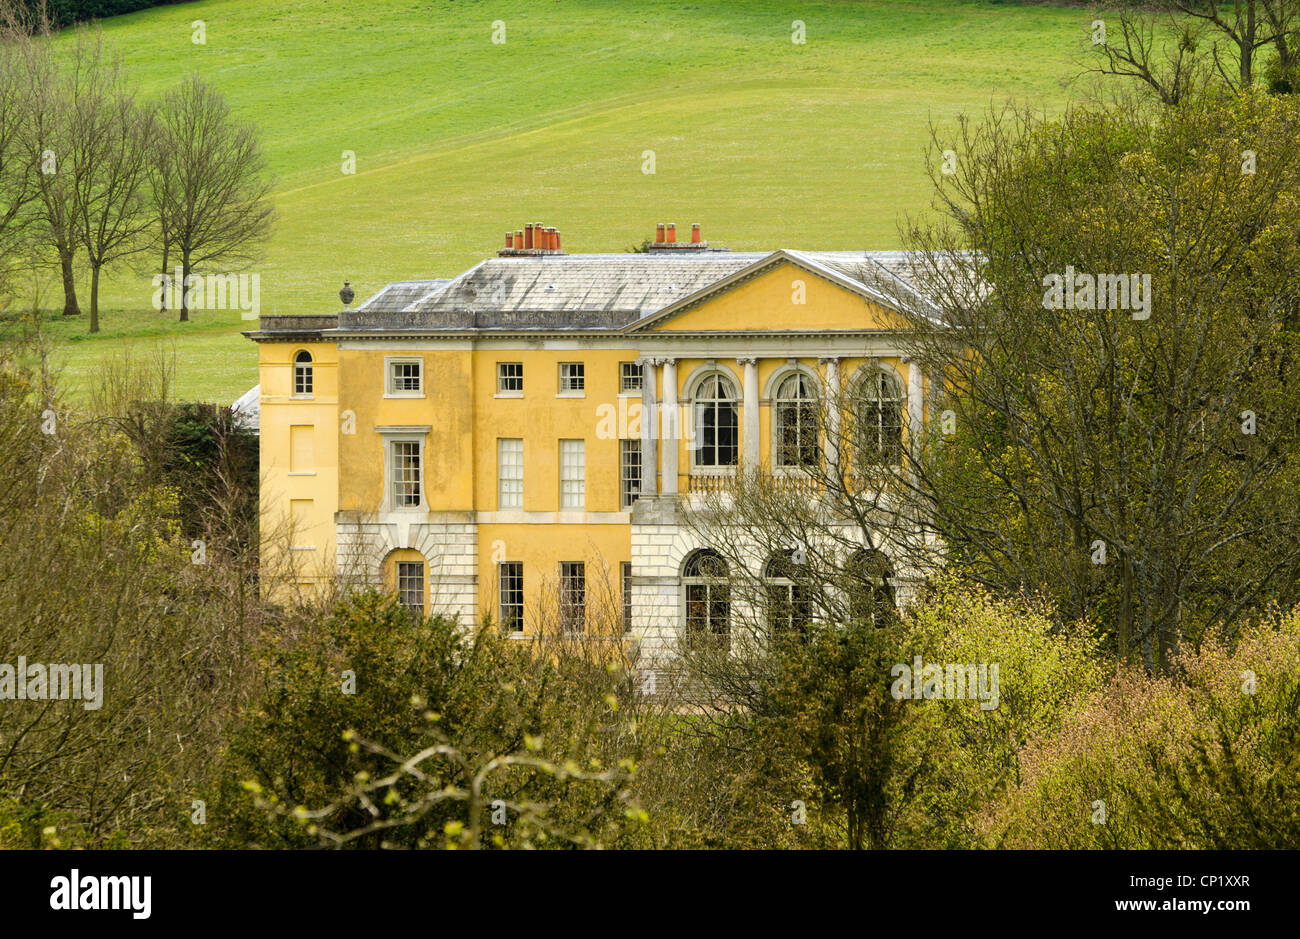 A view of West Wycombe Park and grounds a National Trust property, image taken from a public road. Stock Photo